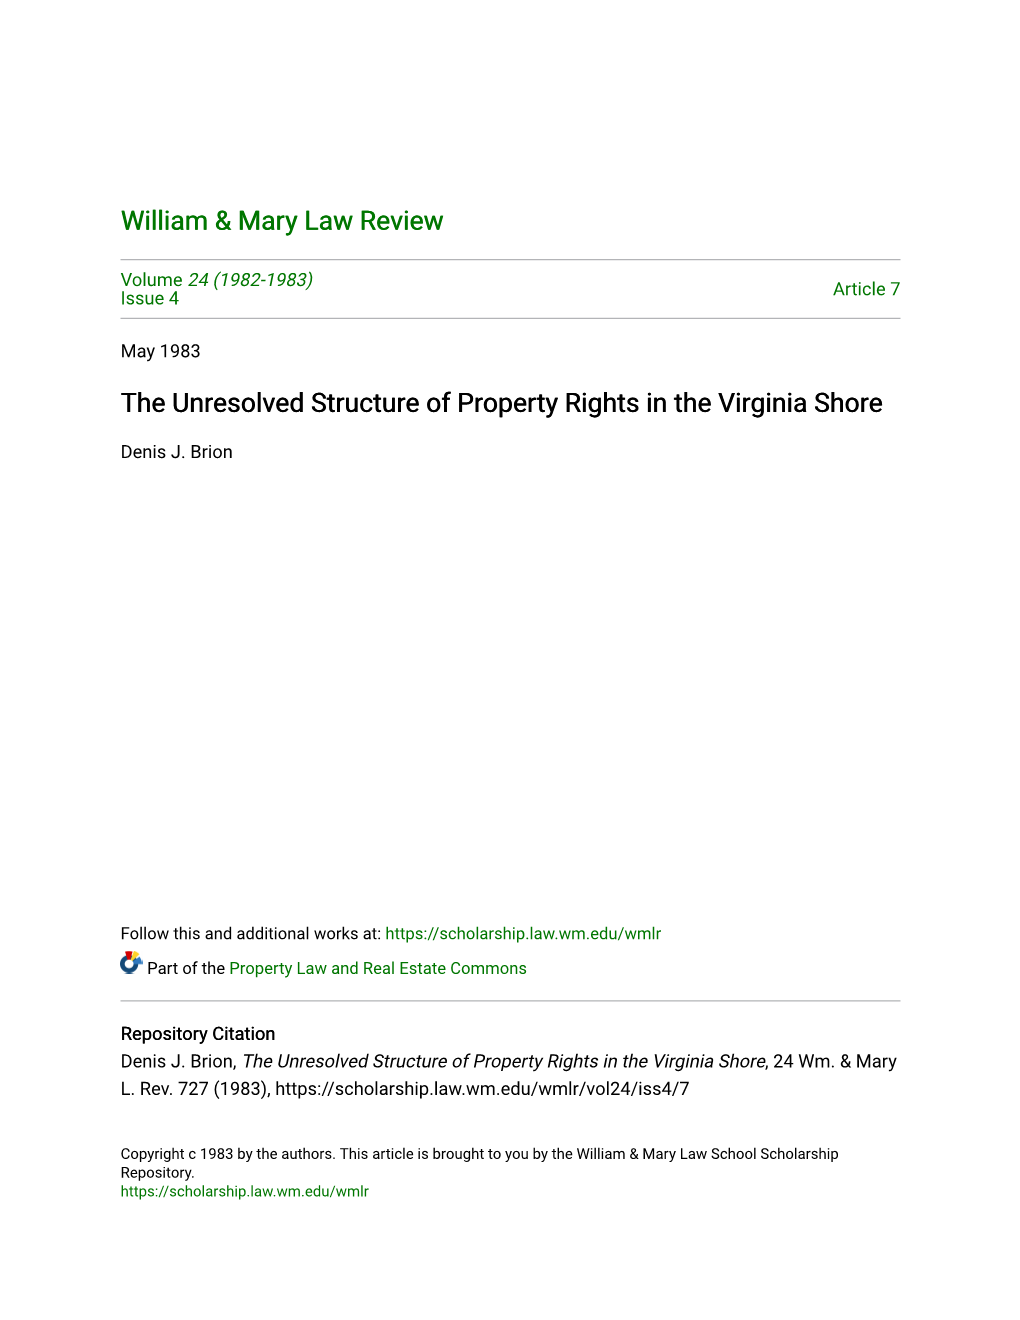 The Unresolved Structure of Property Rights in the Virginia Shore